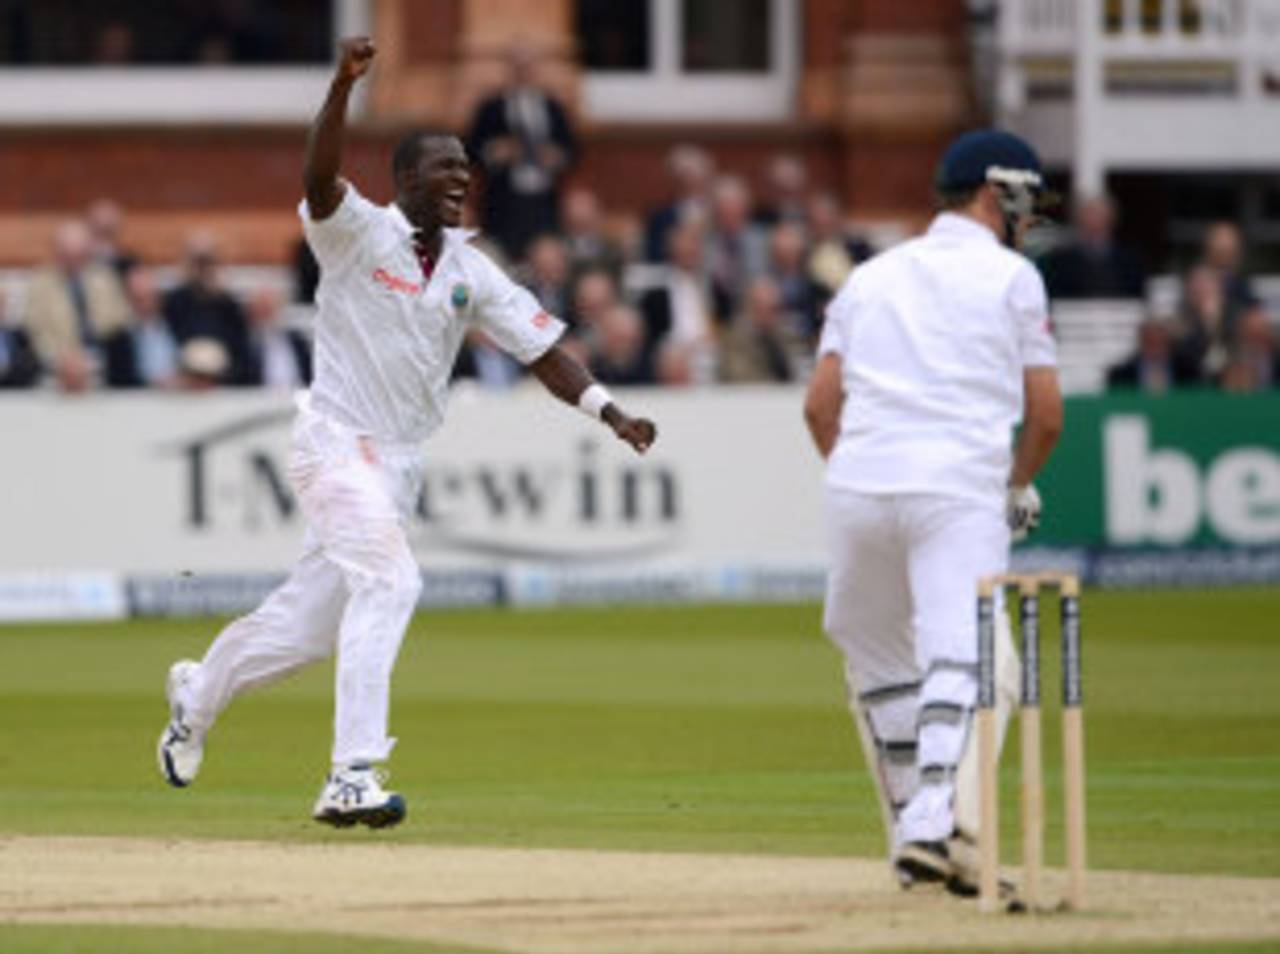 Darren Sammy had Jonathan Trott caught behind, England v West Indies, 1st Test, Lord's, 2nd day, May 18, 2012